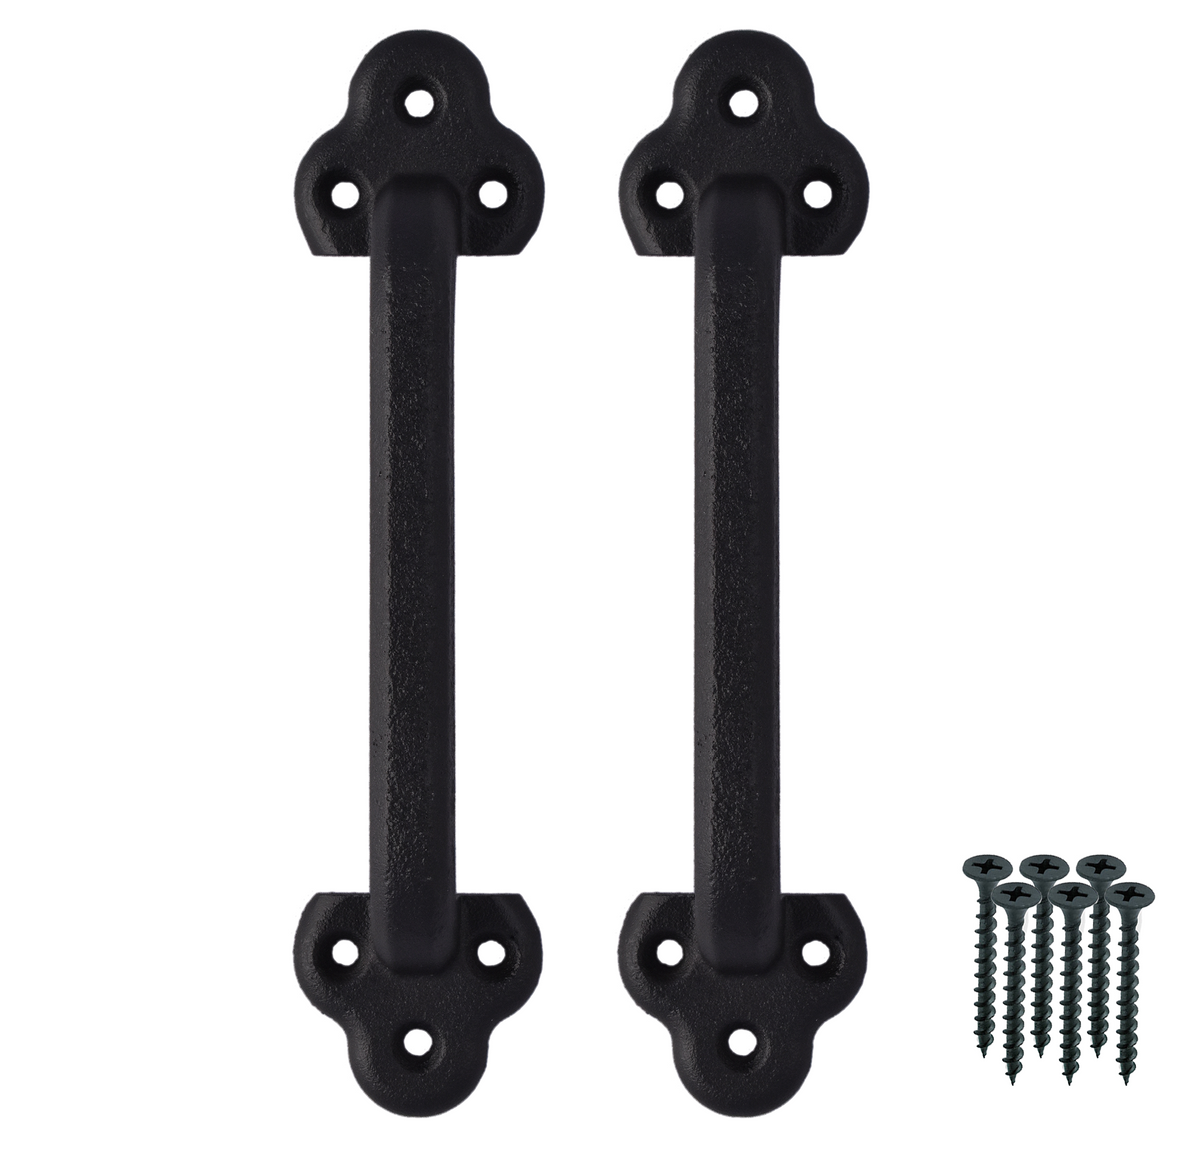 Iron Pull Handle for Doors Set of 2 Rustic Style for Barn Doors, Gates and more